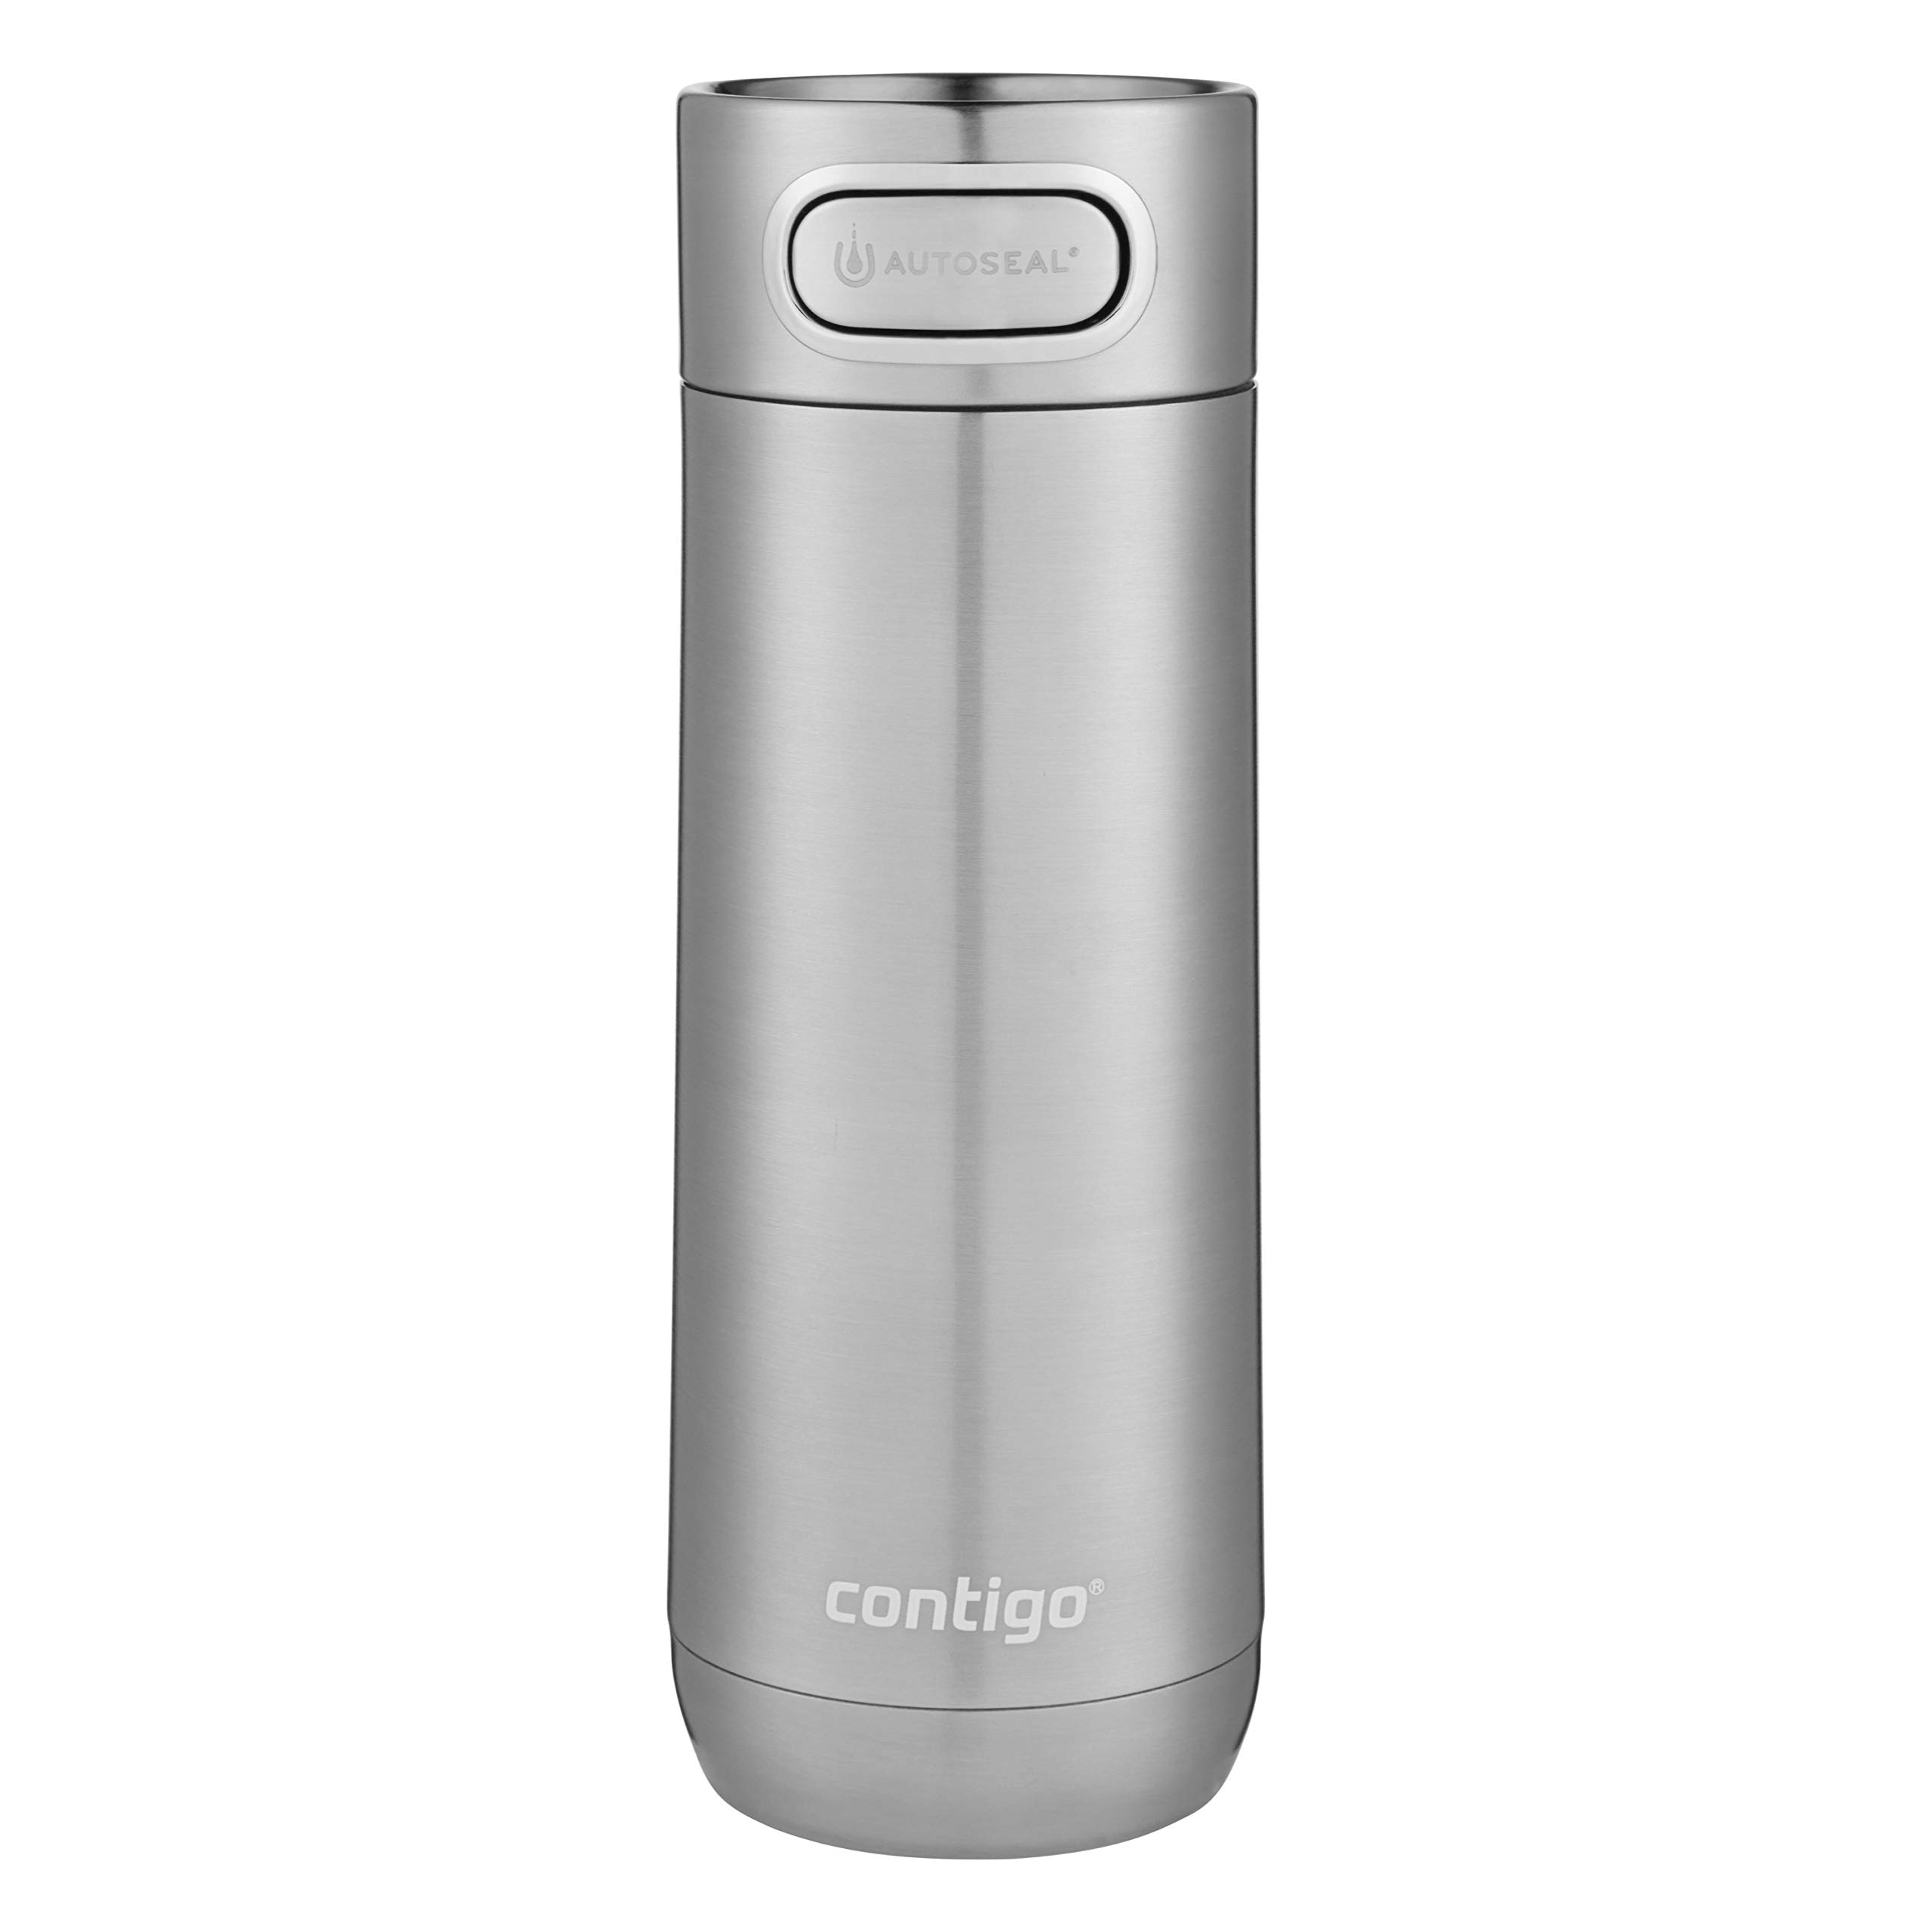 16oz Contigo Luxe Vacuum-Insulated Stainless Steel Thermal Travel Mug (Stainless Steel) $15 + Free Shipping w/ Prime or on $35+